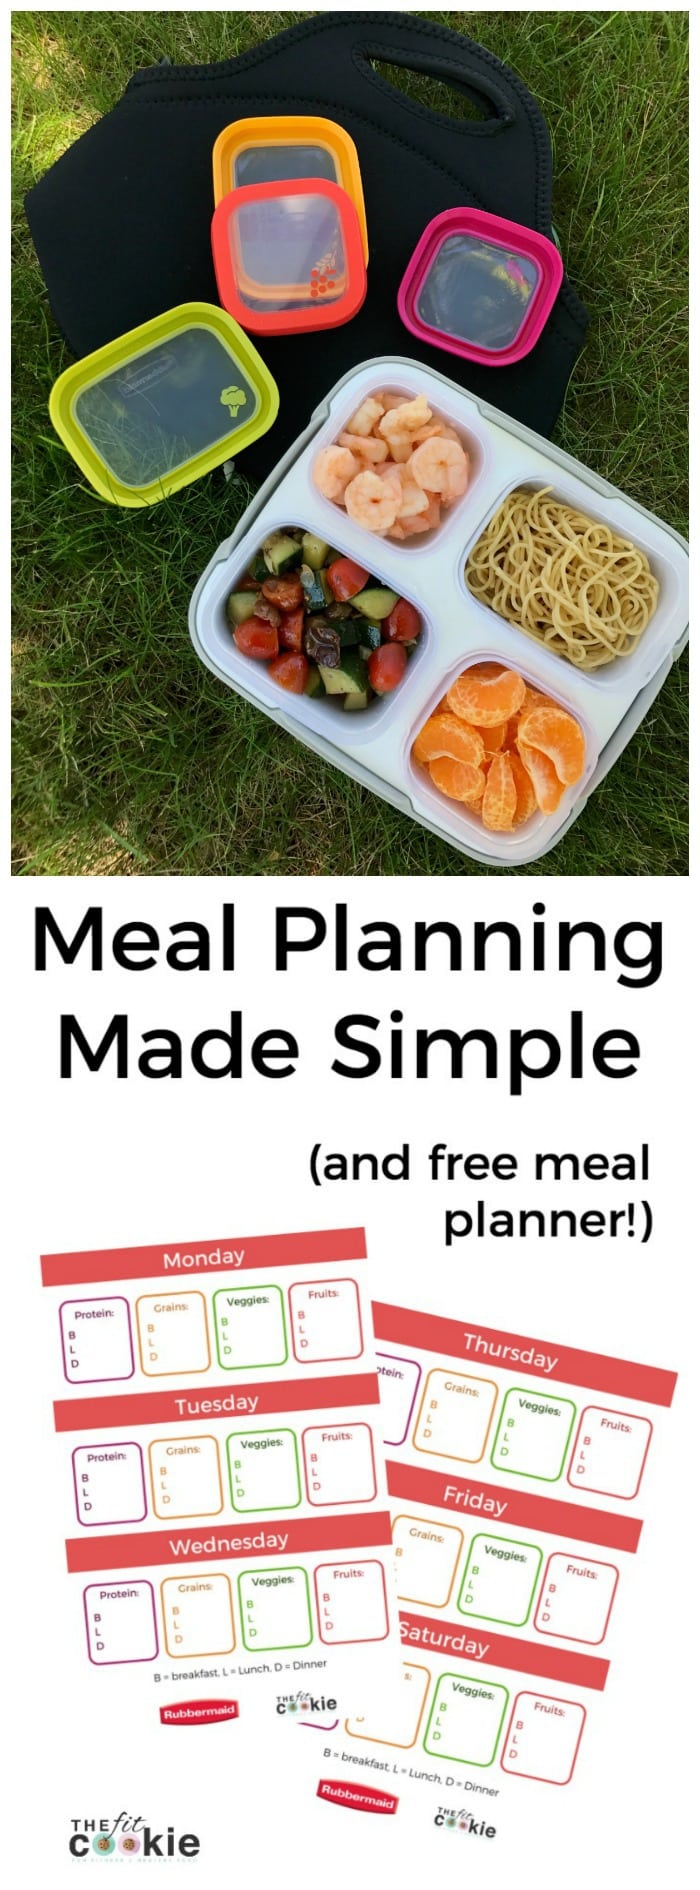 We all know that meal planning is essential for healthy eating, but sometimes it's hard to know where to start. Here are some tips to make meal planning simple, plus a free meal planner and a giveaway! - Sponsored by @Rubbermaid #BalancedBites